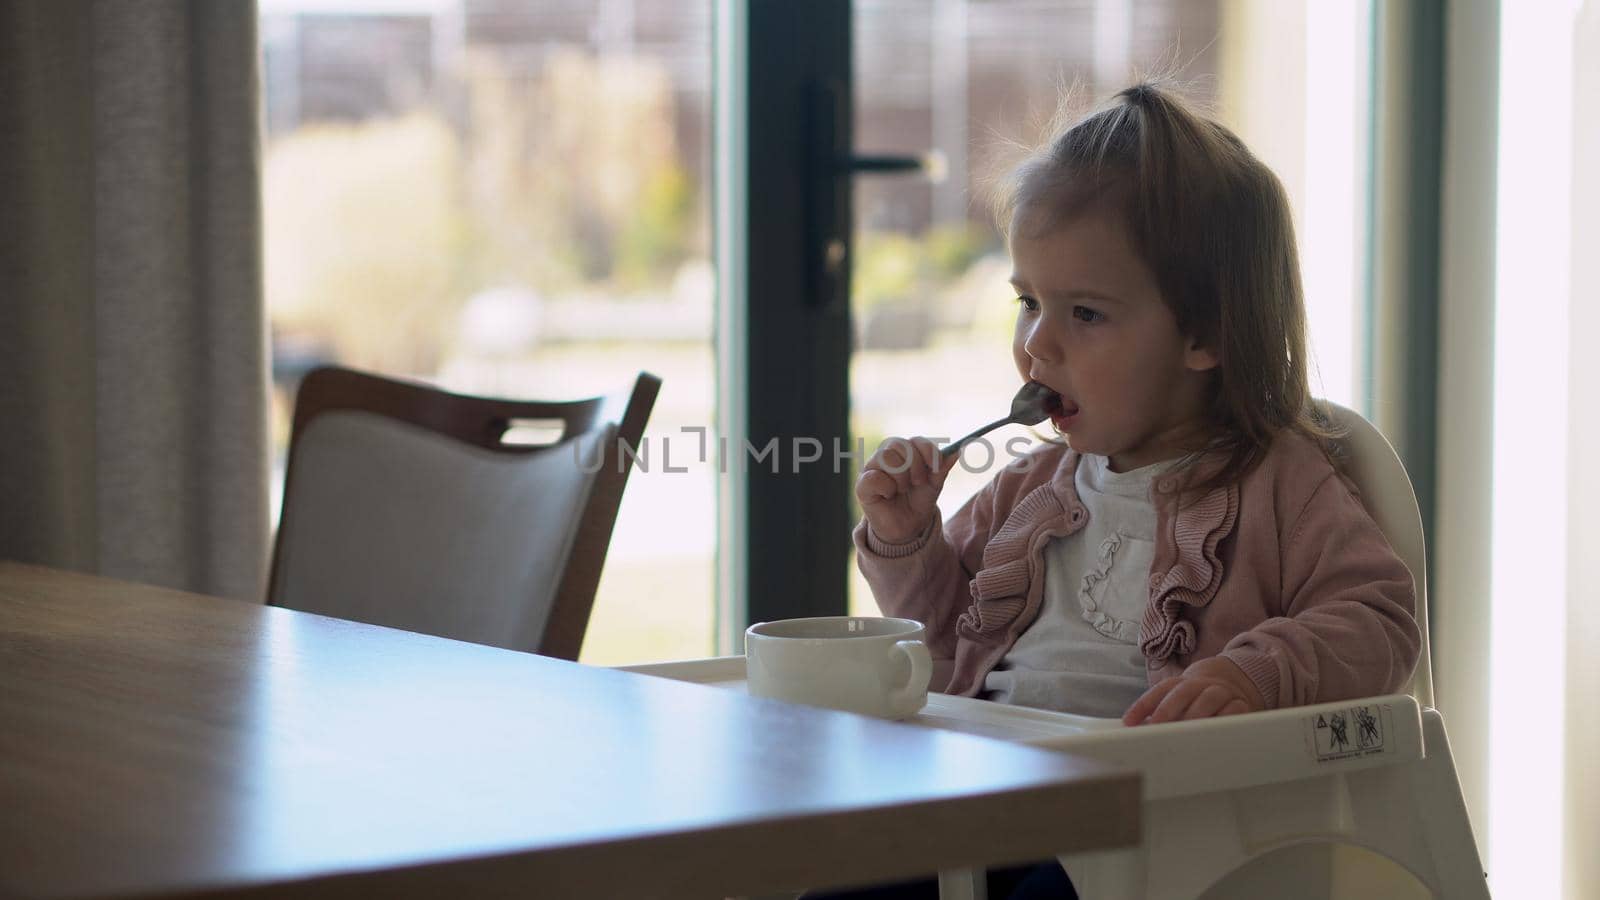 Closeup of young baby in white feeding high chair, kid is trying to eat himself, happy child with food stained face, little Girl eats porridge with spoon. High quality feeding up breakfast in kitchen.